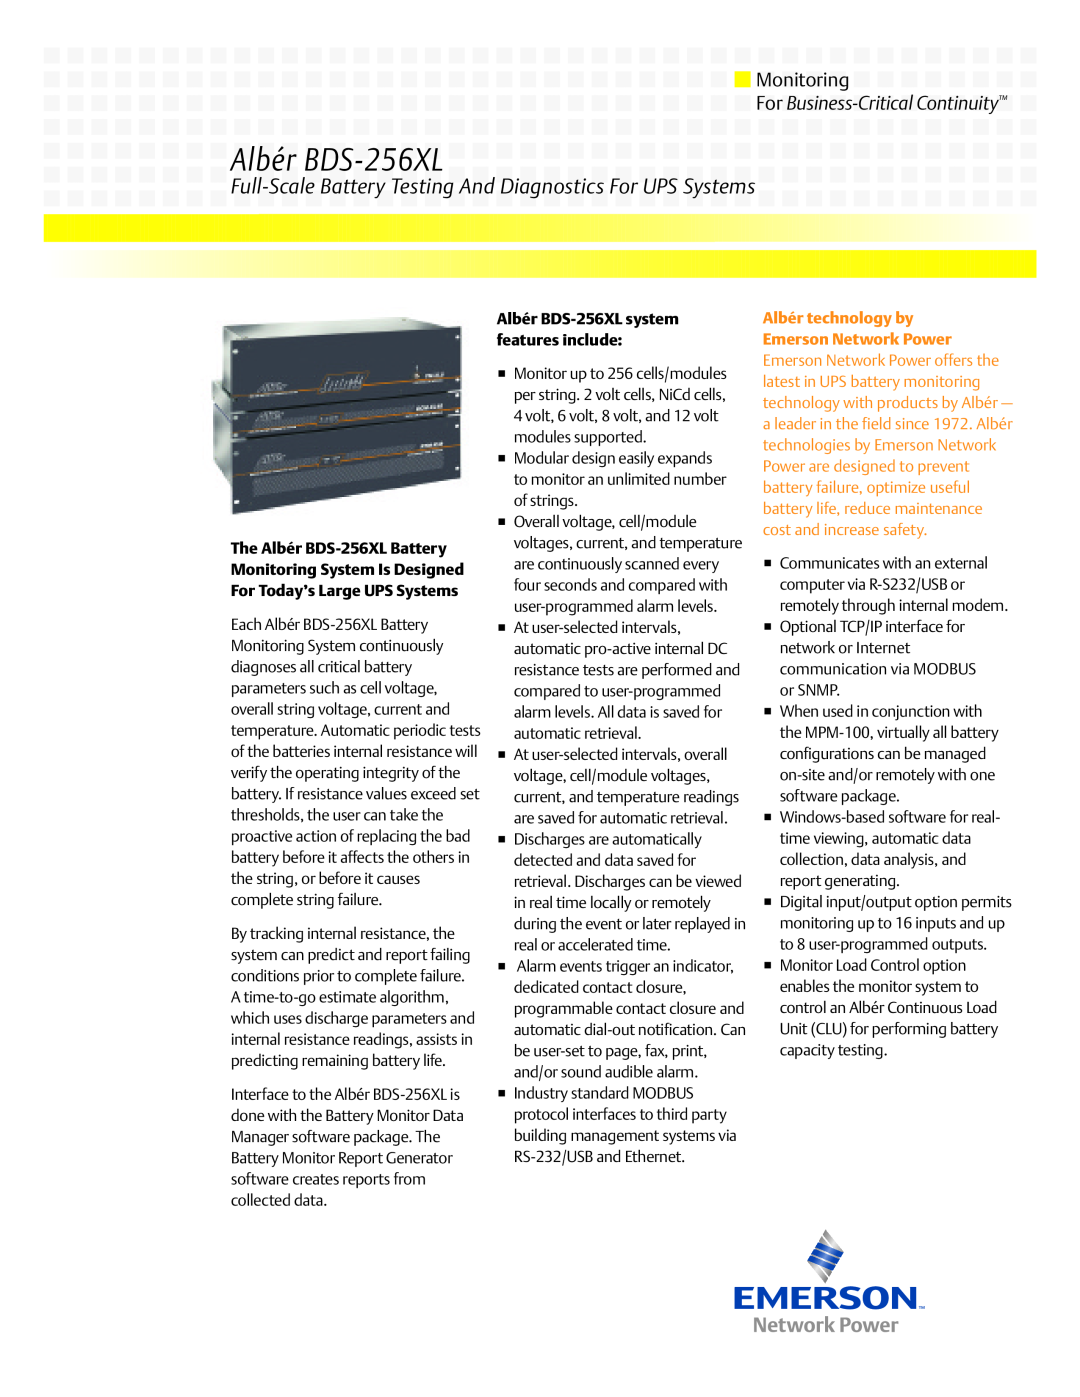 Emerson manual The Albér BDS-256XL Battery Monitoring System Is Designed, For Today’s Large UPS Systems 